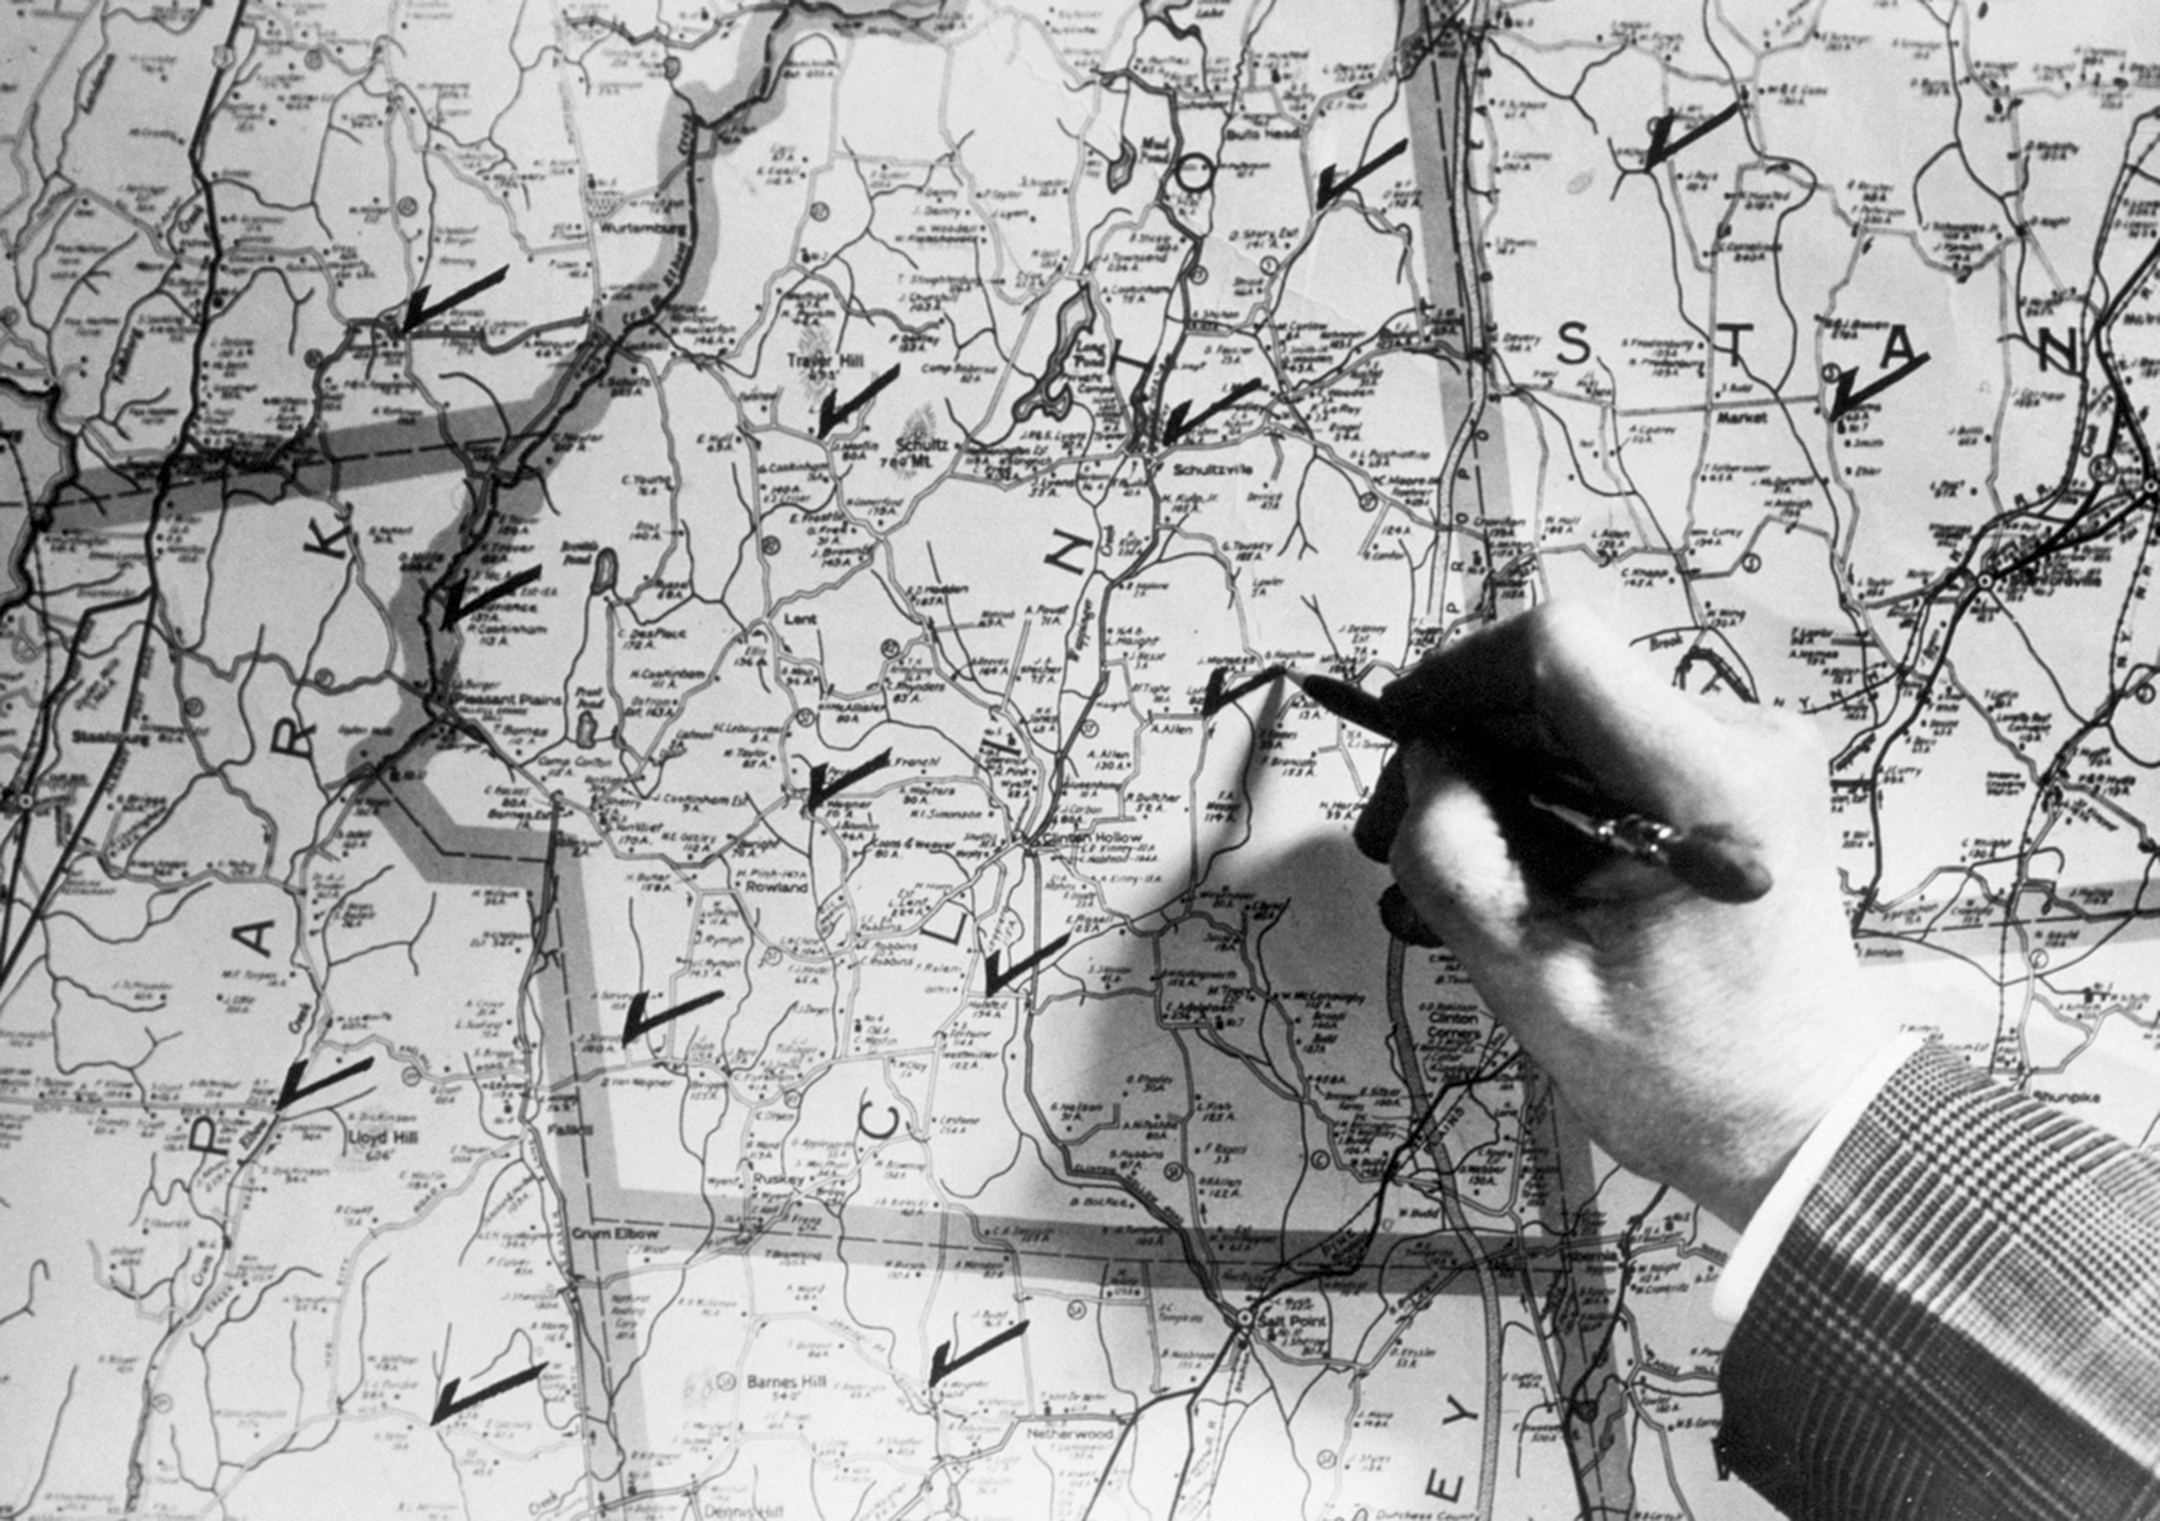 Black and white photo of a man's hand checking off towns on map in 1940s